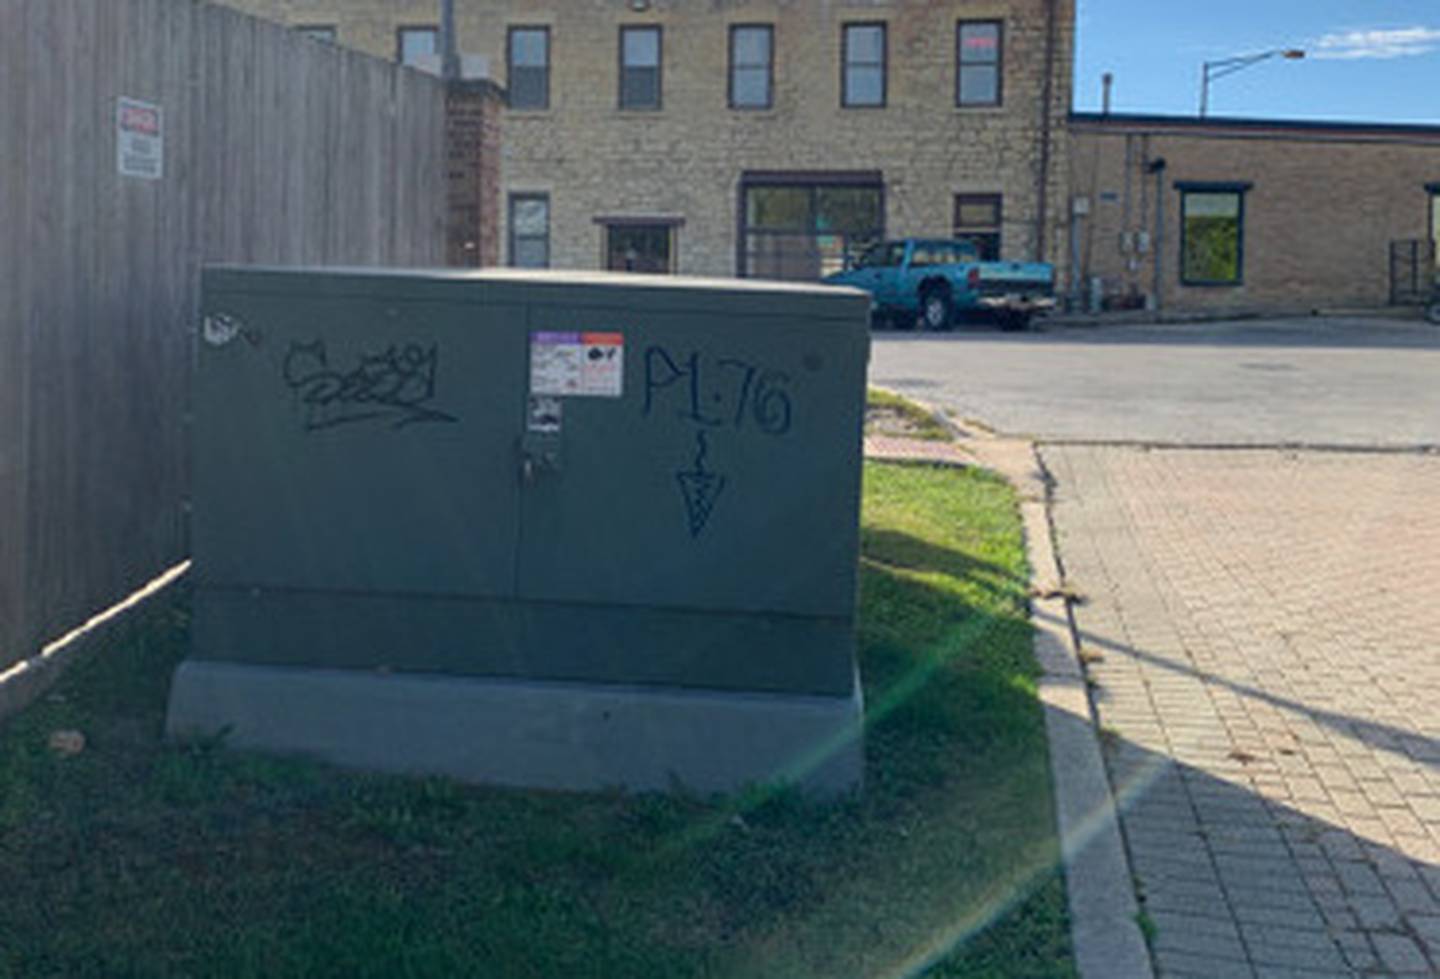 Utility boxes in the 100 block of Shumway Avenue in Batavia were tagged with P1-76 and an arrow pointing downward. Police ares seeking tips as to who is doing it, as more areas of the city are being tagged.